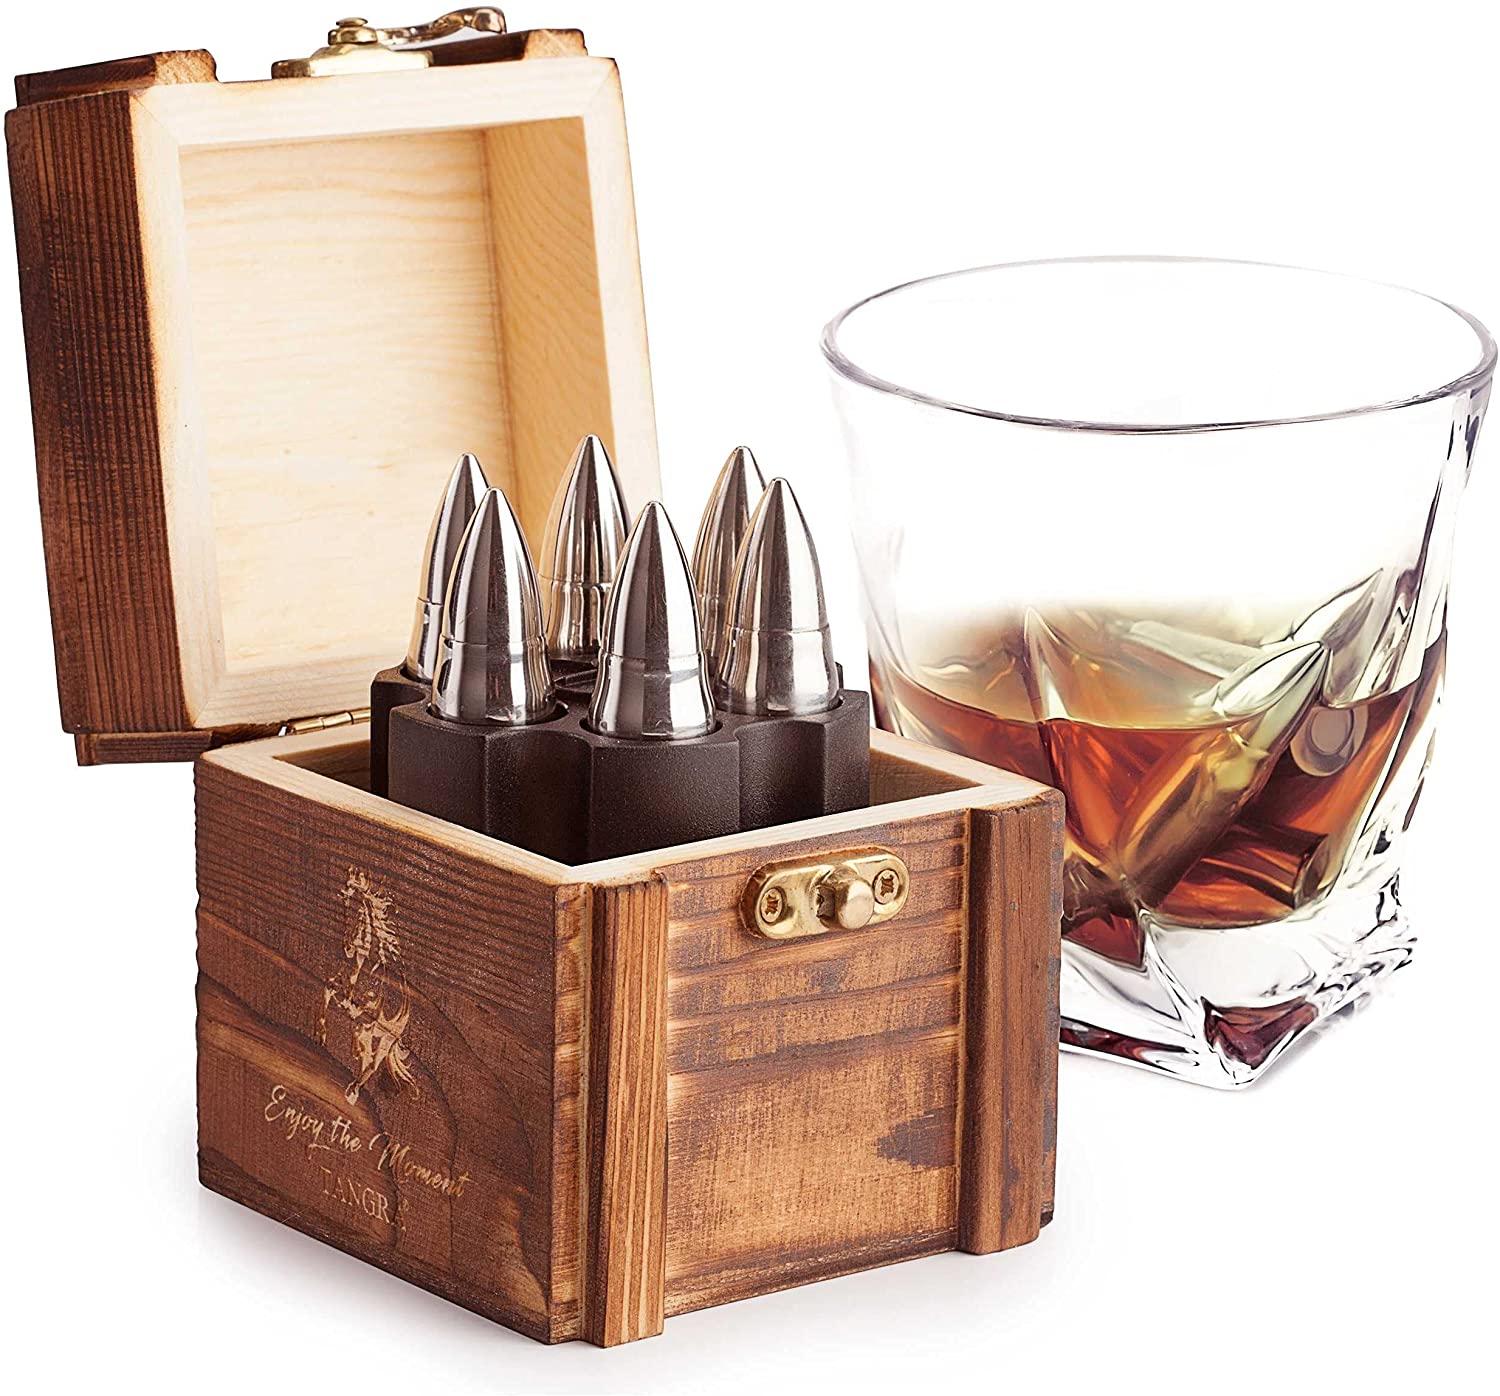 Stainless Steel Whiskey Stones Bullets Reusable Chilling Stone Ice Cubes in wooden box Featured Image